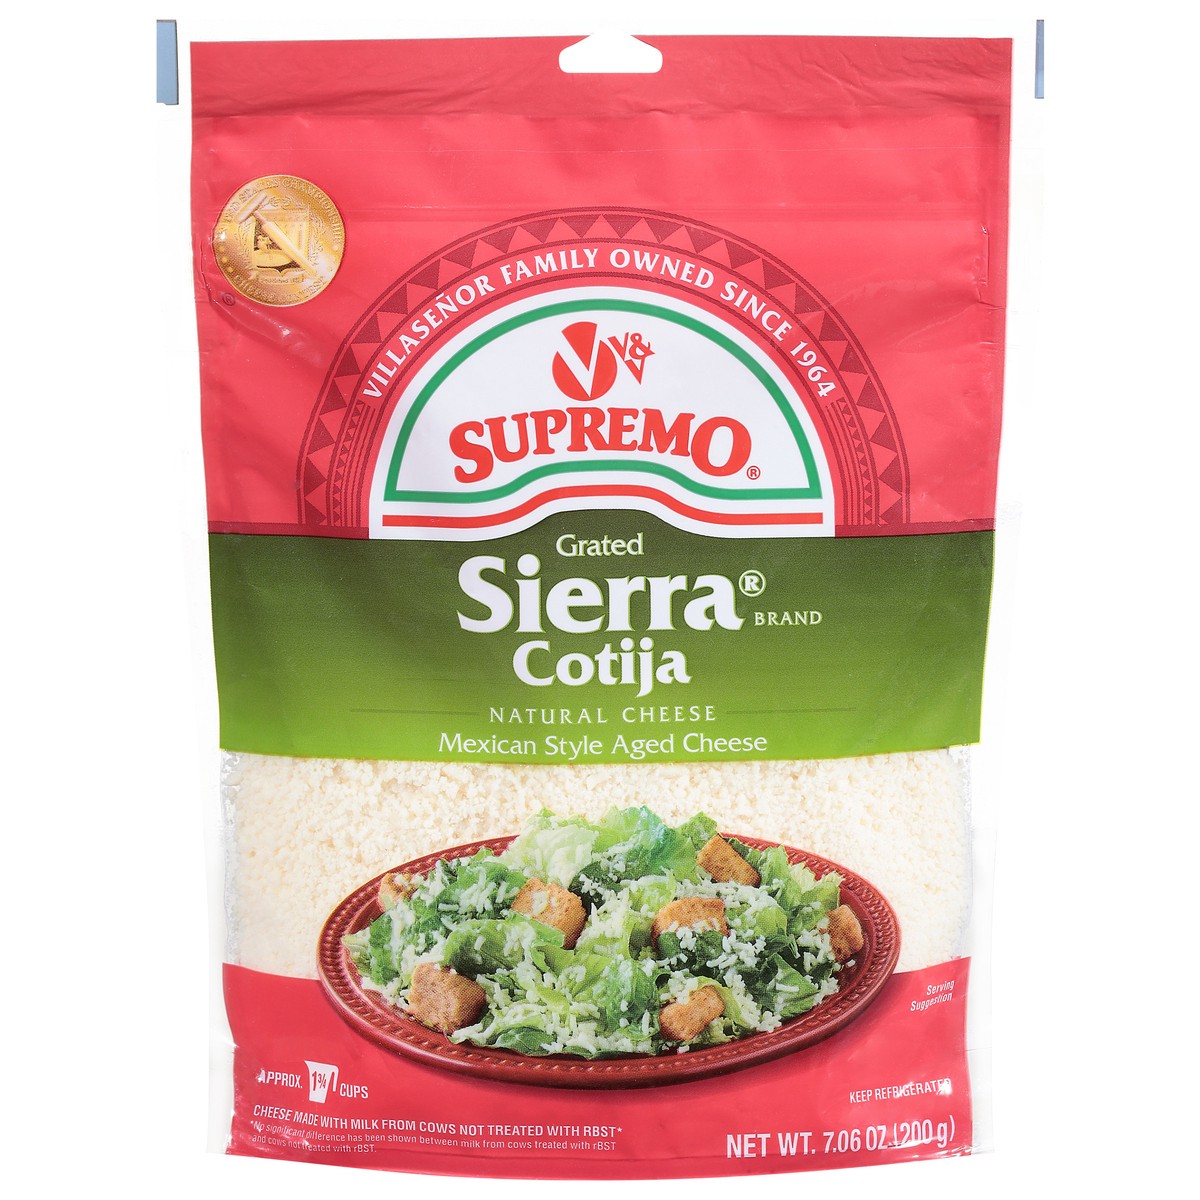 slide 1 of 14, Supremo Natural Sierra Brand Cotija Grated Cheese 7.06 oz, 1 ct